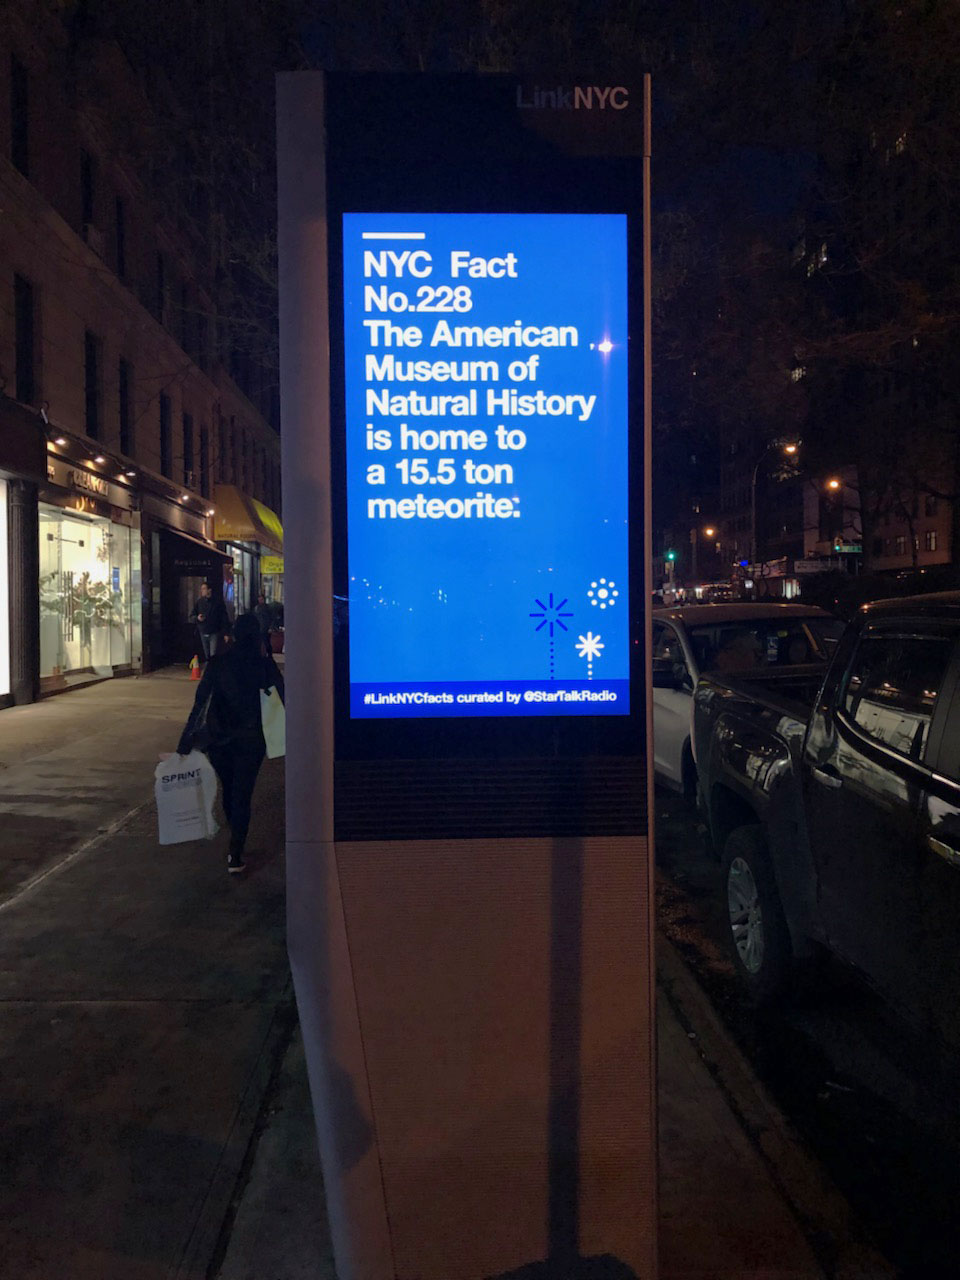 LinkNYC Fact 228 about the 15.5 ton meteorite at the American Museum of Natural History. Credit: Ben Ratner.